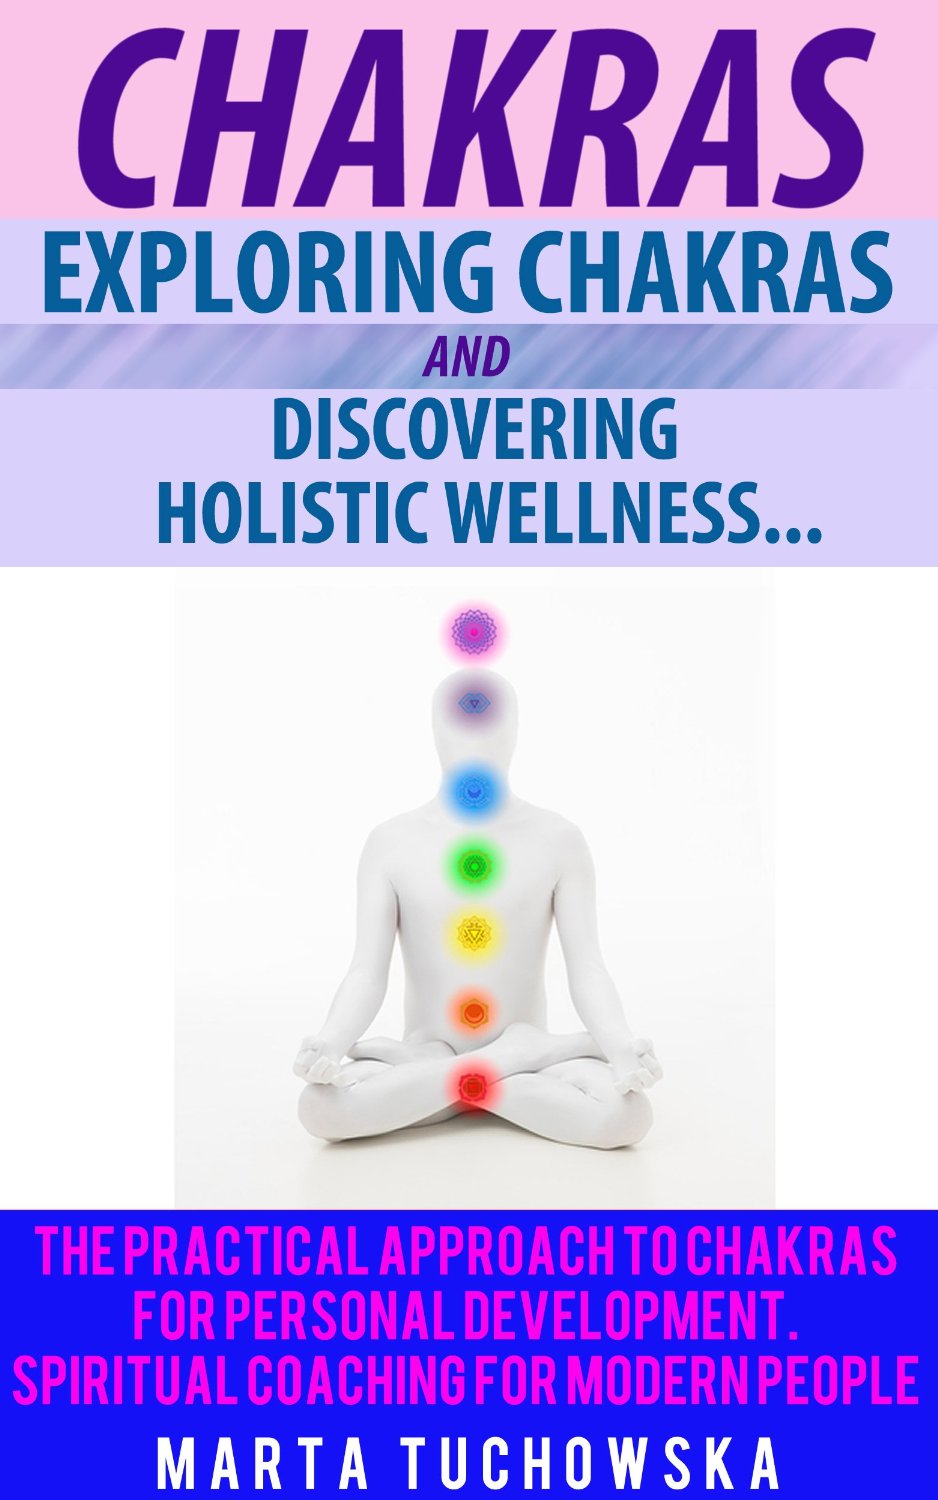 Chakras: Exploring Chakras and Discovering Holistic Wellness-The Practical Approach to Chakras for Personal Development by Marta Tuchowska